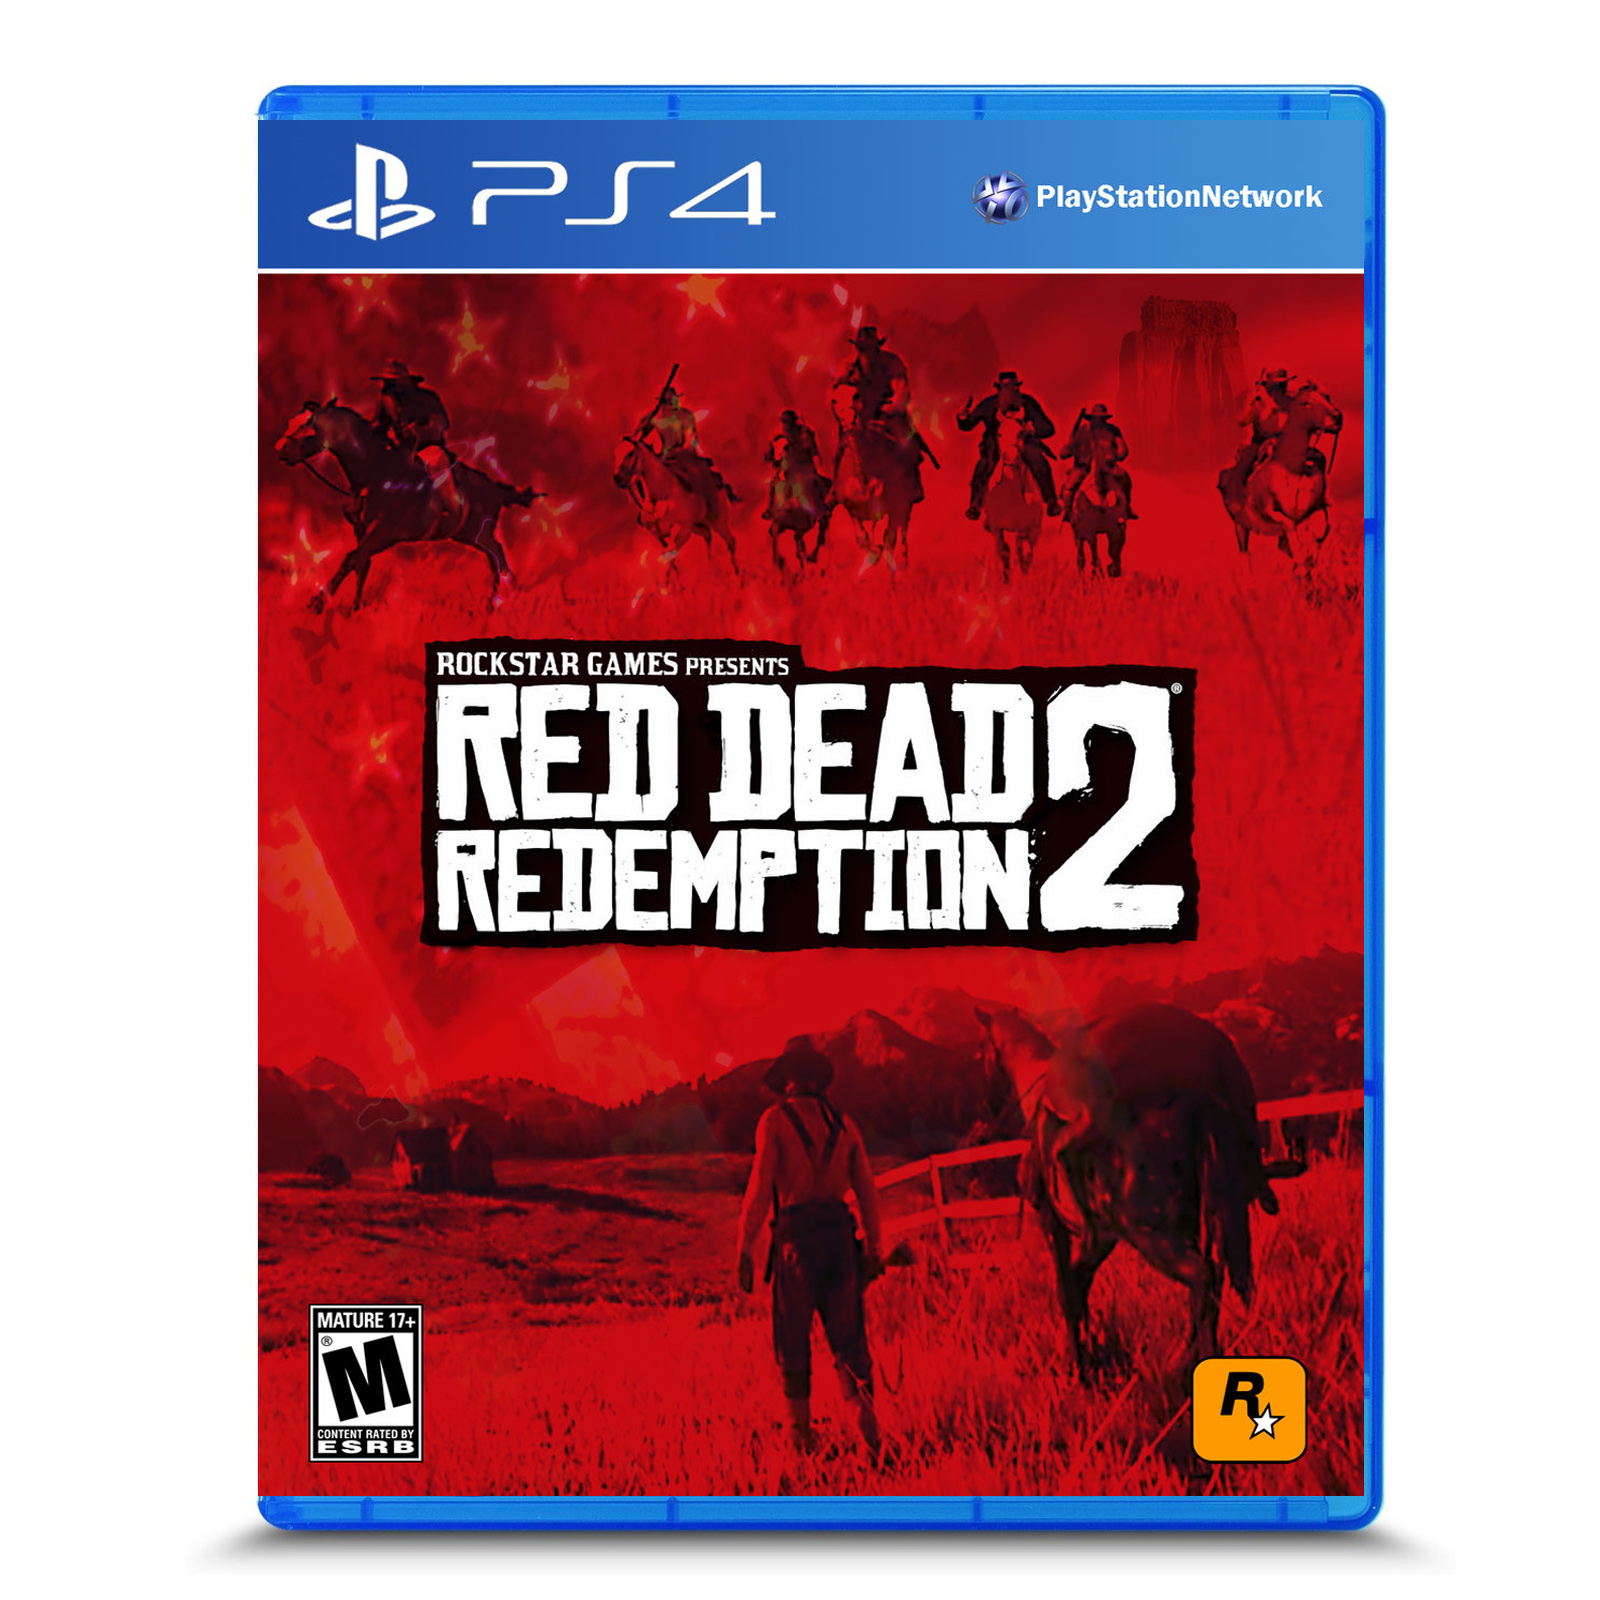 Игра red ps4. Rdr 2 ps4 диск. Red Dead Redemption 2 диск пс4. Red Dead Redemption ps4 диск. Ред дед редемпшен 2 ps4.